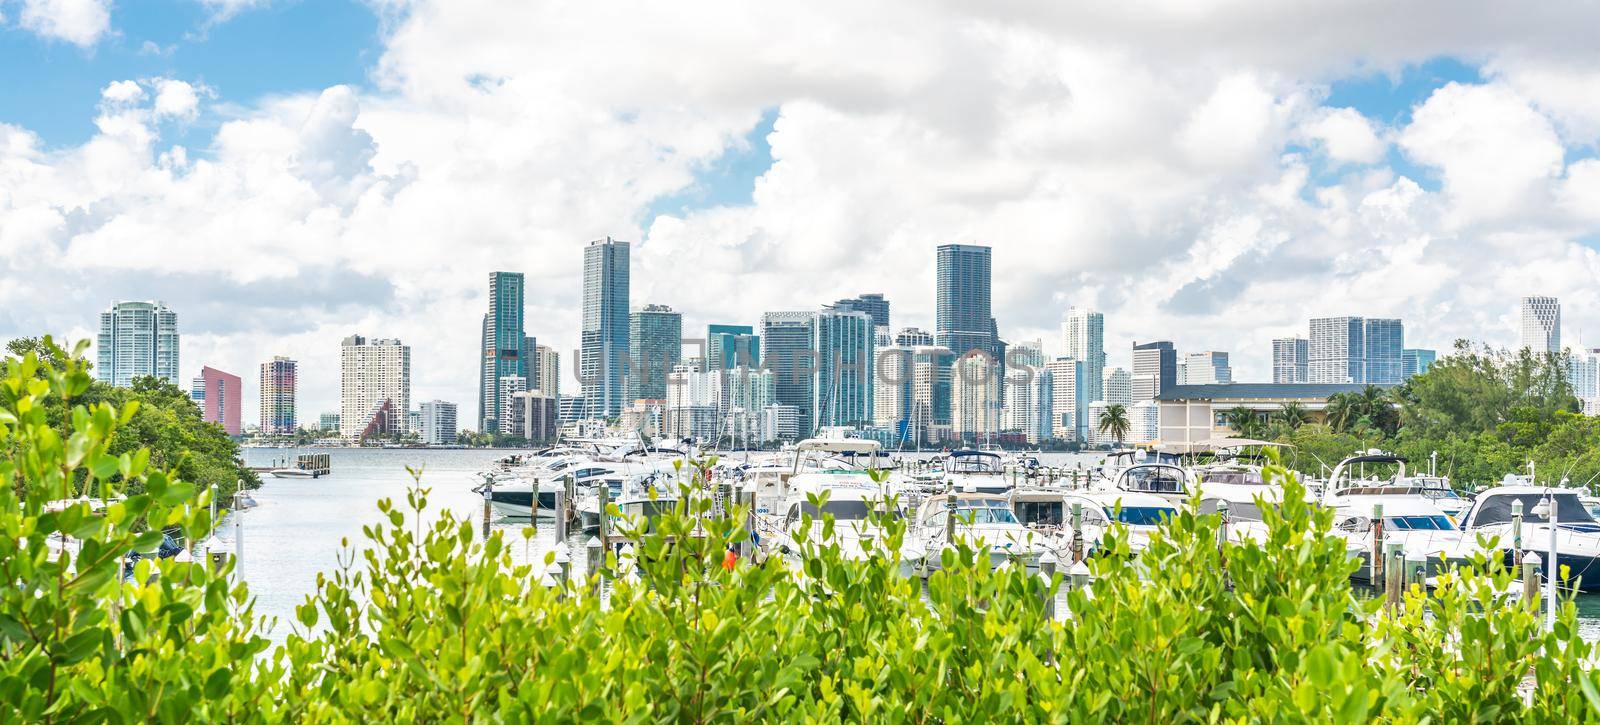 Miami, USA - September 11, 2019: Miami Downtown skyline in daytime with Biscayne Bay and yachts by Mariakray